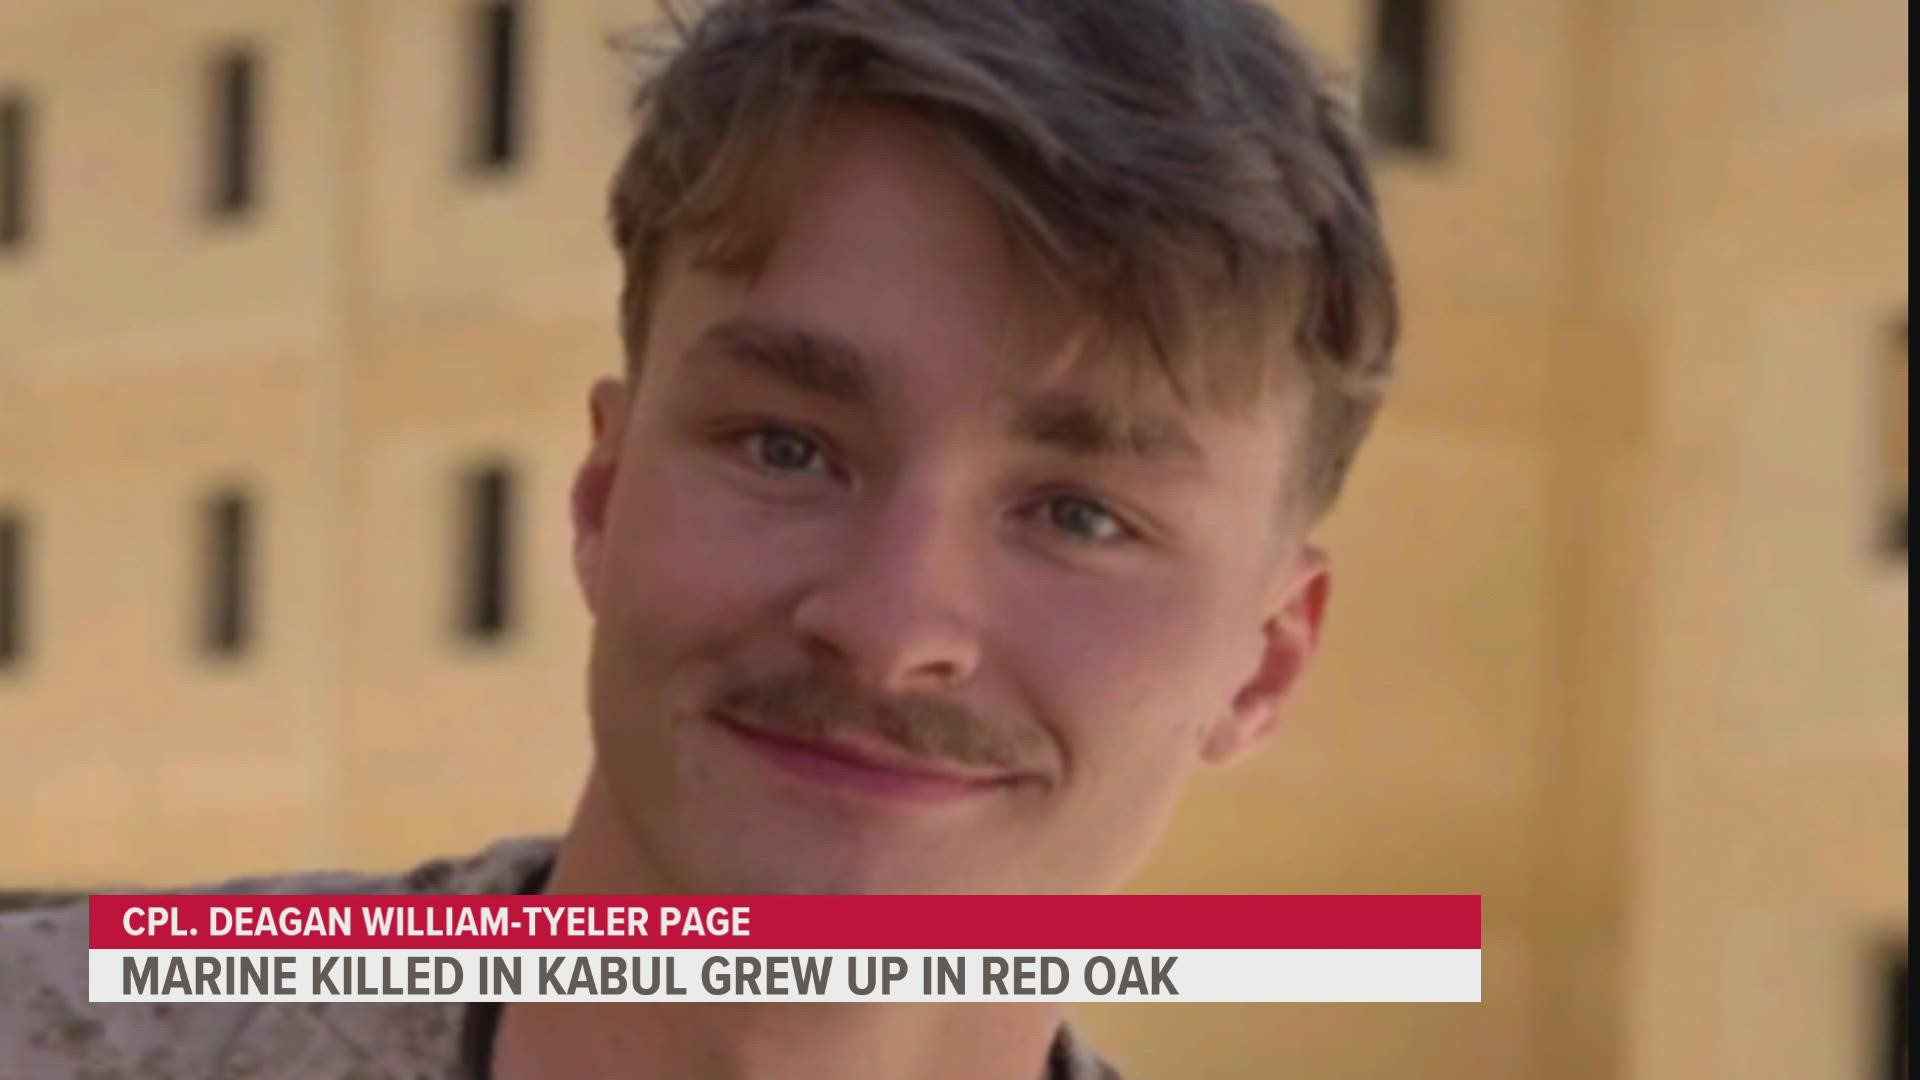 An Omaha native who grew up in Red Oak was among the U.S. service members killed in Thursday's attack at the Kabul airport.